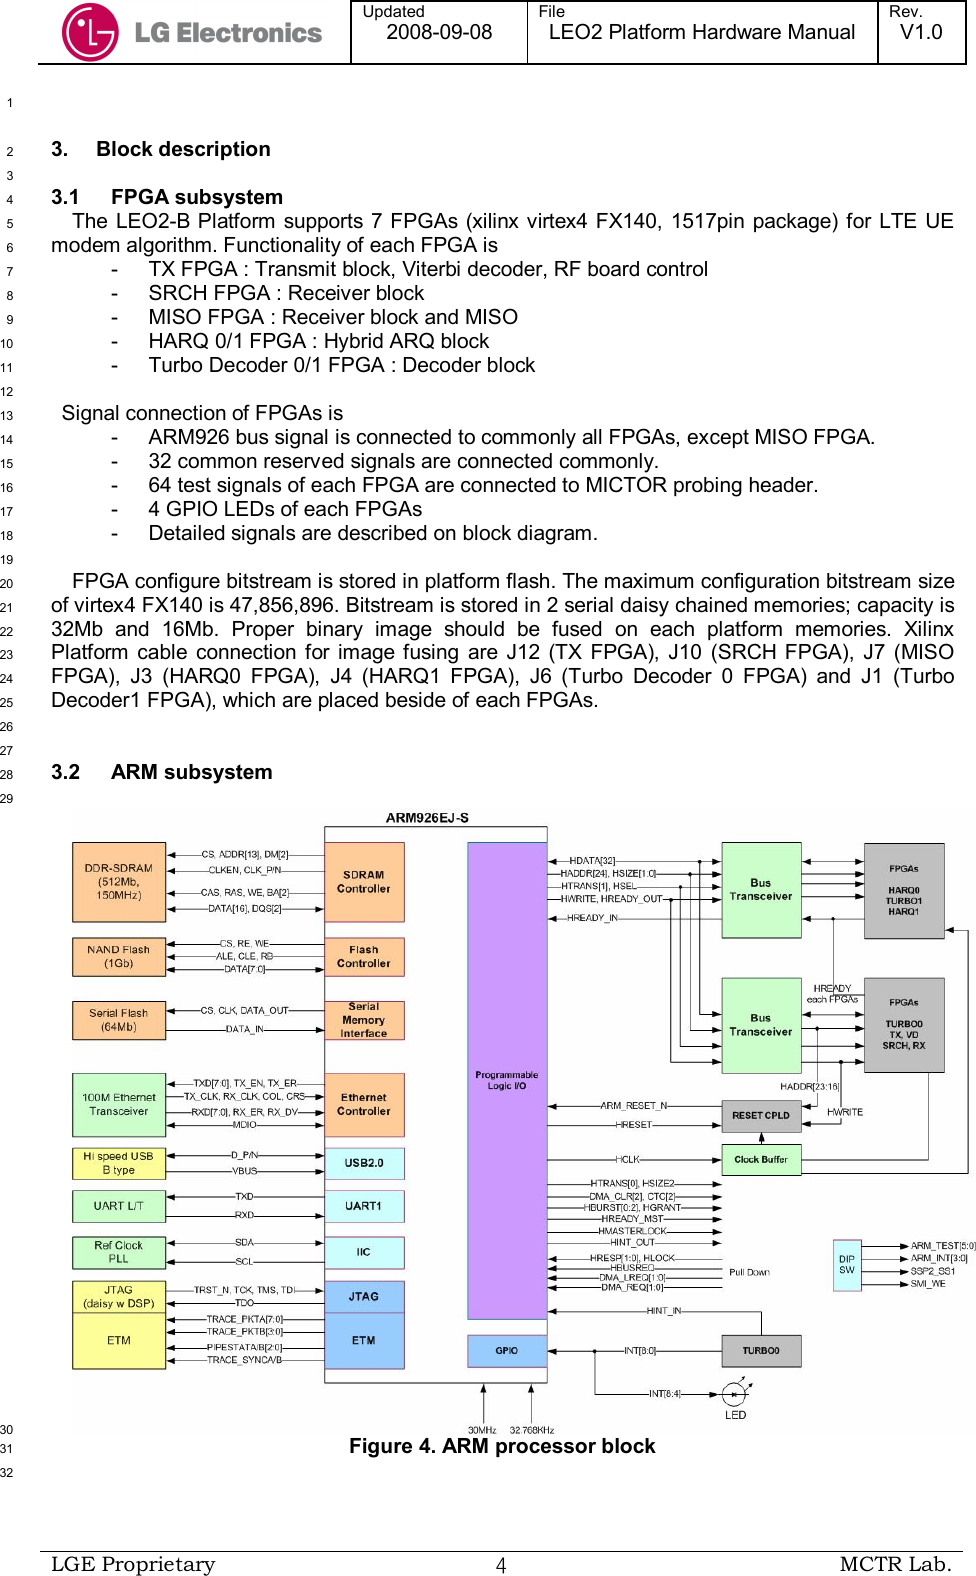  Updated 2008-09-08 File LEO2 Platform Hardware Manual Rev. V1.0   LGE Proprietary  ４ MCTR Lab.   1 3.  Block description 2  3 3.1  FPGA subsystem 4 The LEO2-B Platform  supports 7 FPGAs (xilinx virtex4 FX140, 1517pin package) for LTE UE 5 modem algorithm. Functionality of each FPGA is  6 -  TX FPGA : Transmit block, Viterbi decoder, RF board control 7 -  SRCH FPGA : Receiver block 8 -  MISO FPGA : Receiver block and MISO 9 -  HARQ 0/1 FPGA : Hybrid ARQ block 10 -  Turbo Decoder 0/1 FPGA : Decoder block 11  12 Signal connection of FPGAs is 13 -  ARM926 bus signal is connected to commonly all FPGAs, except MISO FPGA.  14 -  32 common reserved signals are connected commonly. 15 -  64 test signals of each FPGA are connected to MICTOR probing header. 16 -  4 GPIO LEDs of each FPGAs 17 -  Detailed signals are described on block diagram. 18  19 FPGA configure bitstream is stored in platform flash. The maximum configuration bitstream size 20 of virtex4 FX140 is 47,856,896. Bitstream is stored in 2 serial daisy chained memories; capacity is 21 32Mb  and  16Mb.  Proper  binary  image  should  be  fused  on  each  platform  memories.  Xilinx 22 Platform  cable  connection  for image  fusing  are  J12  (TX  FPGA),  J10  (SRCH  FPGA),  J7  (MISO 23 FPGA),  J3  (HARQ0  FPGA),  J4  (HARQ1  FPGA),  J6  (Turbo  Decoder  0  FPGA)  and  J1  (Turbo 24 Decoder1 FPGA), which are placed beside of each FPGAs. 25  26  27 3.2  ARM subsystem 28  29  30 Figure 4. ARM processor block 31  32 